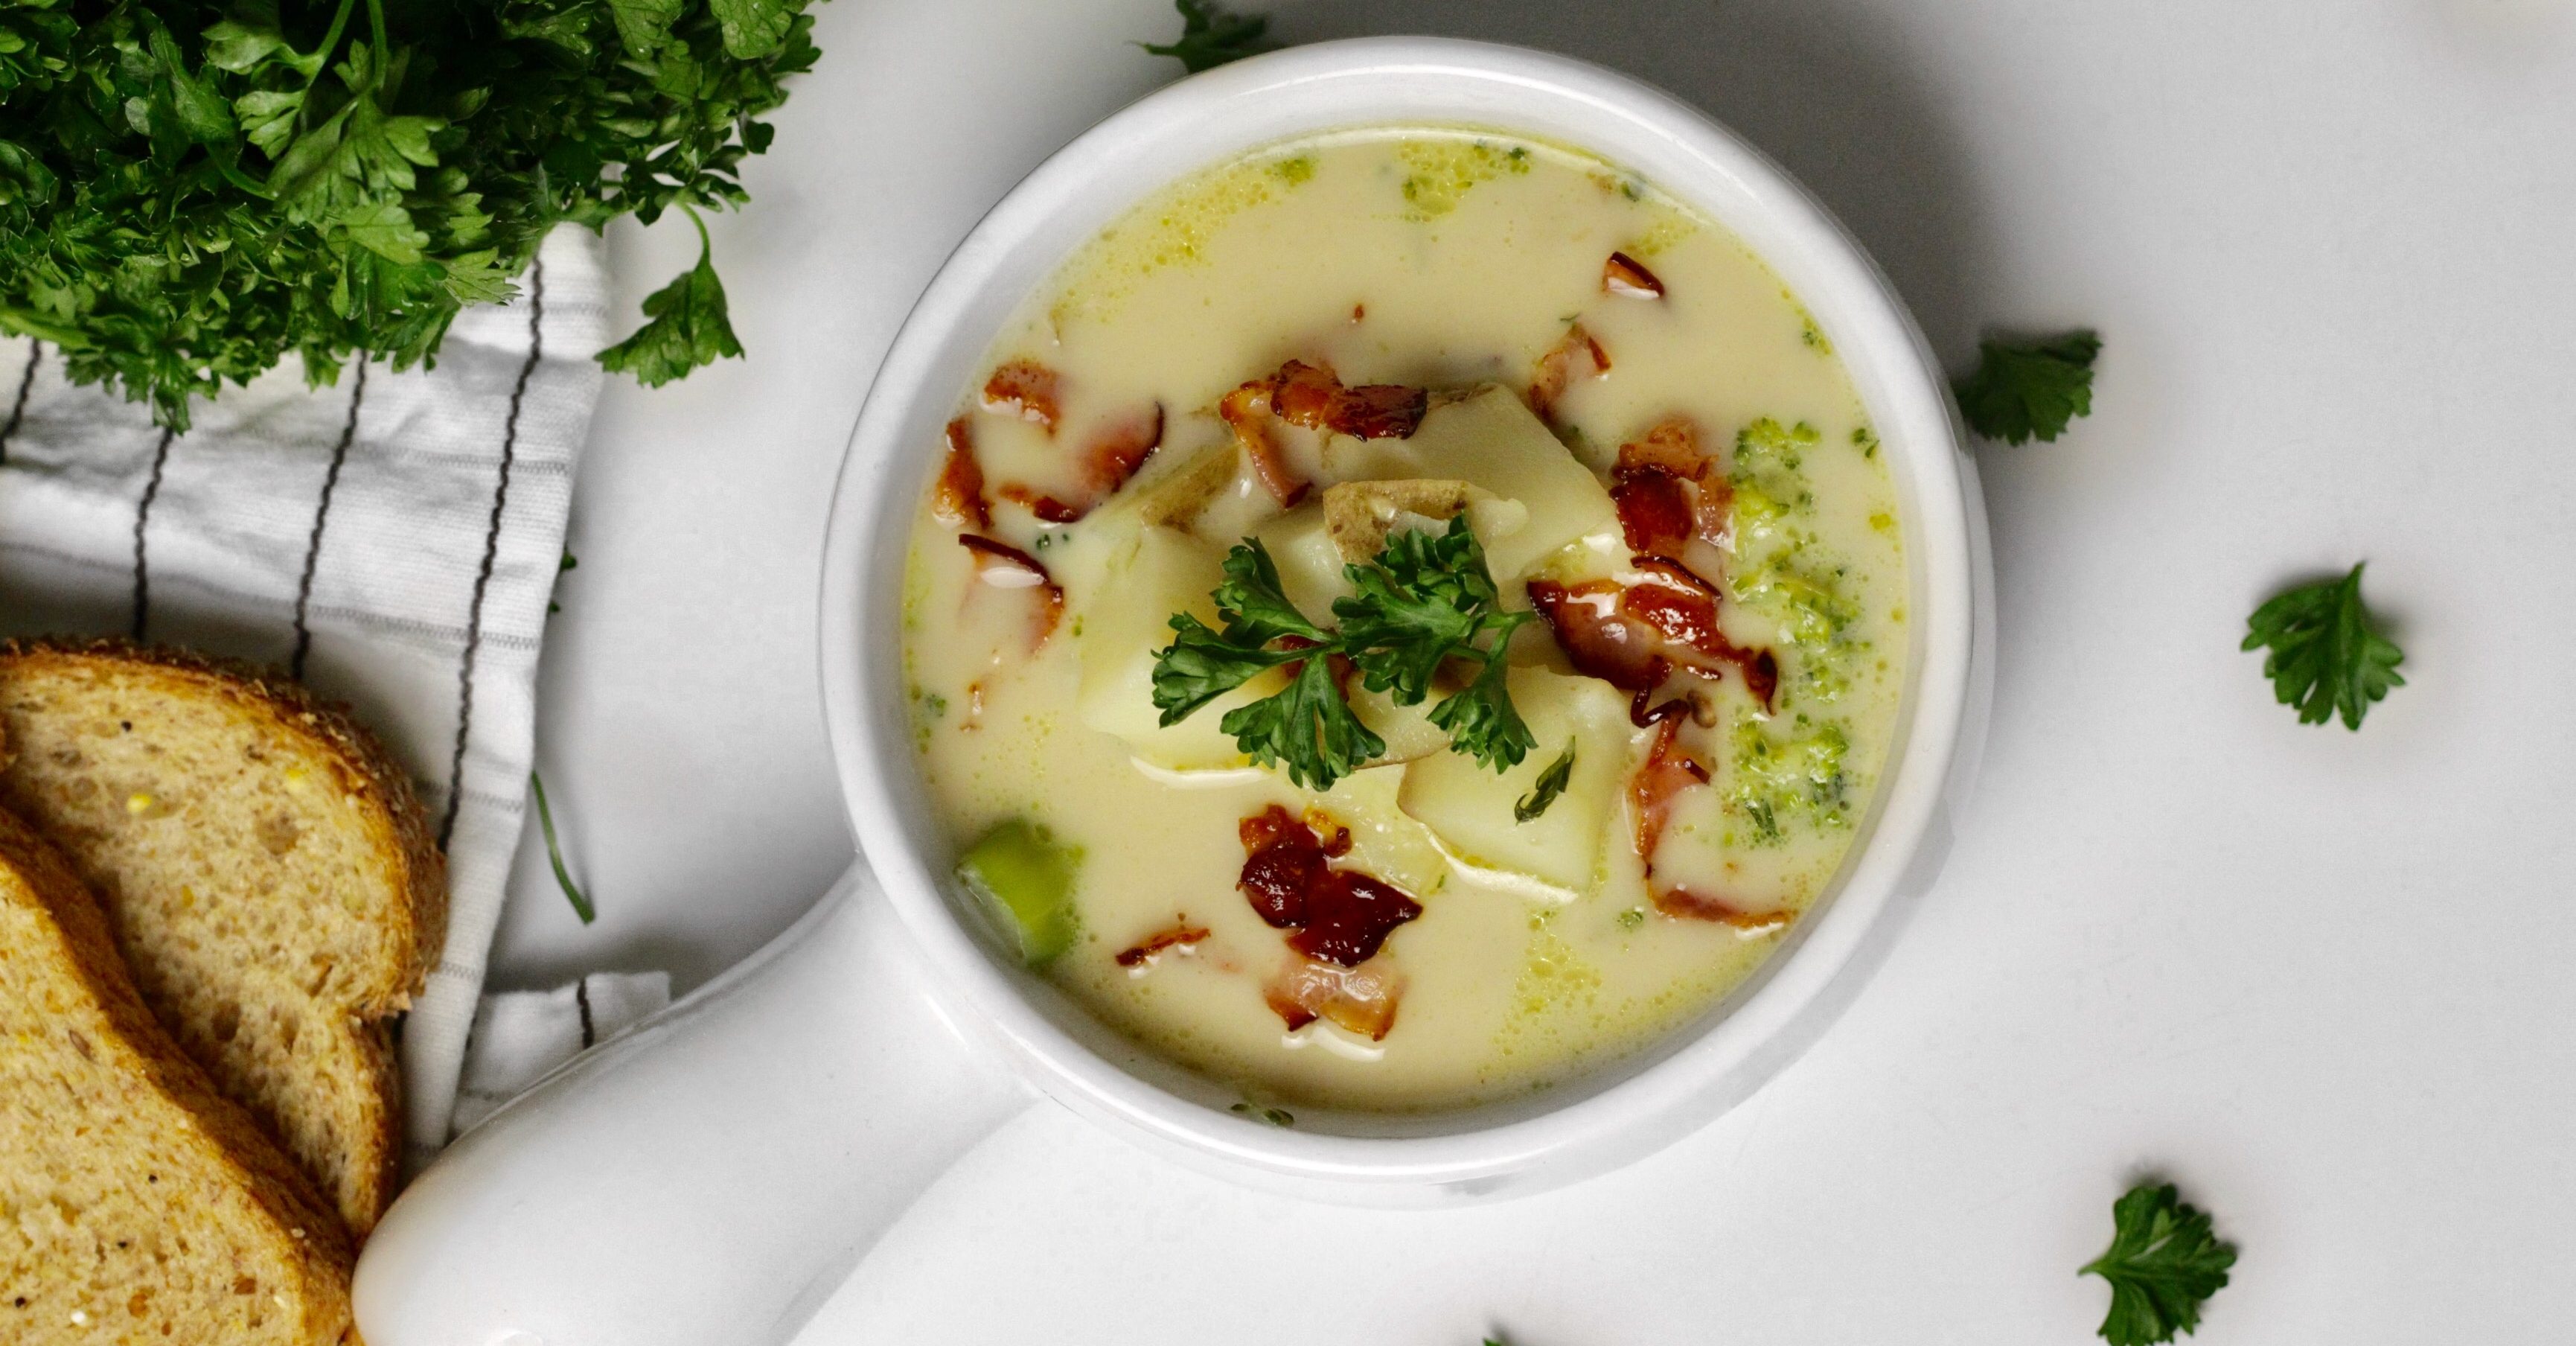 Mamzells' potatoes chowder with broccoli and bacon